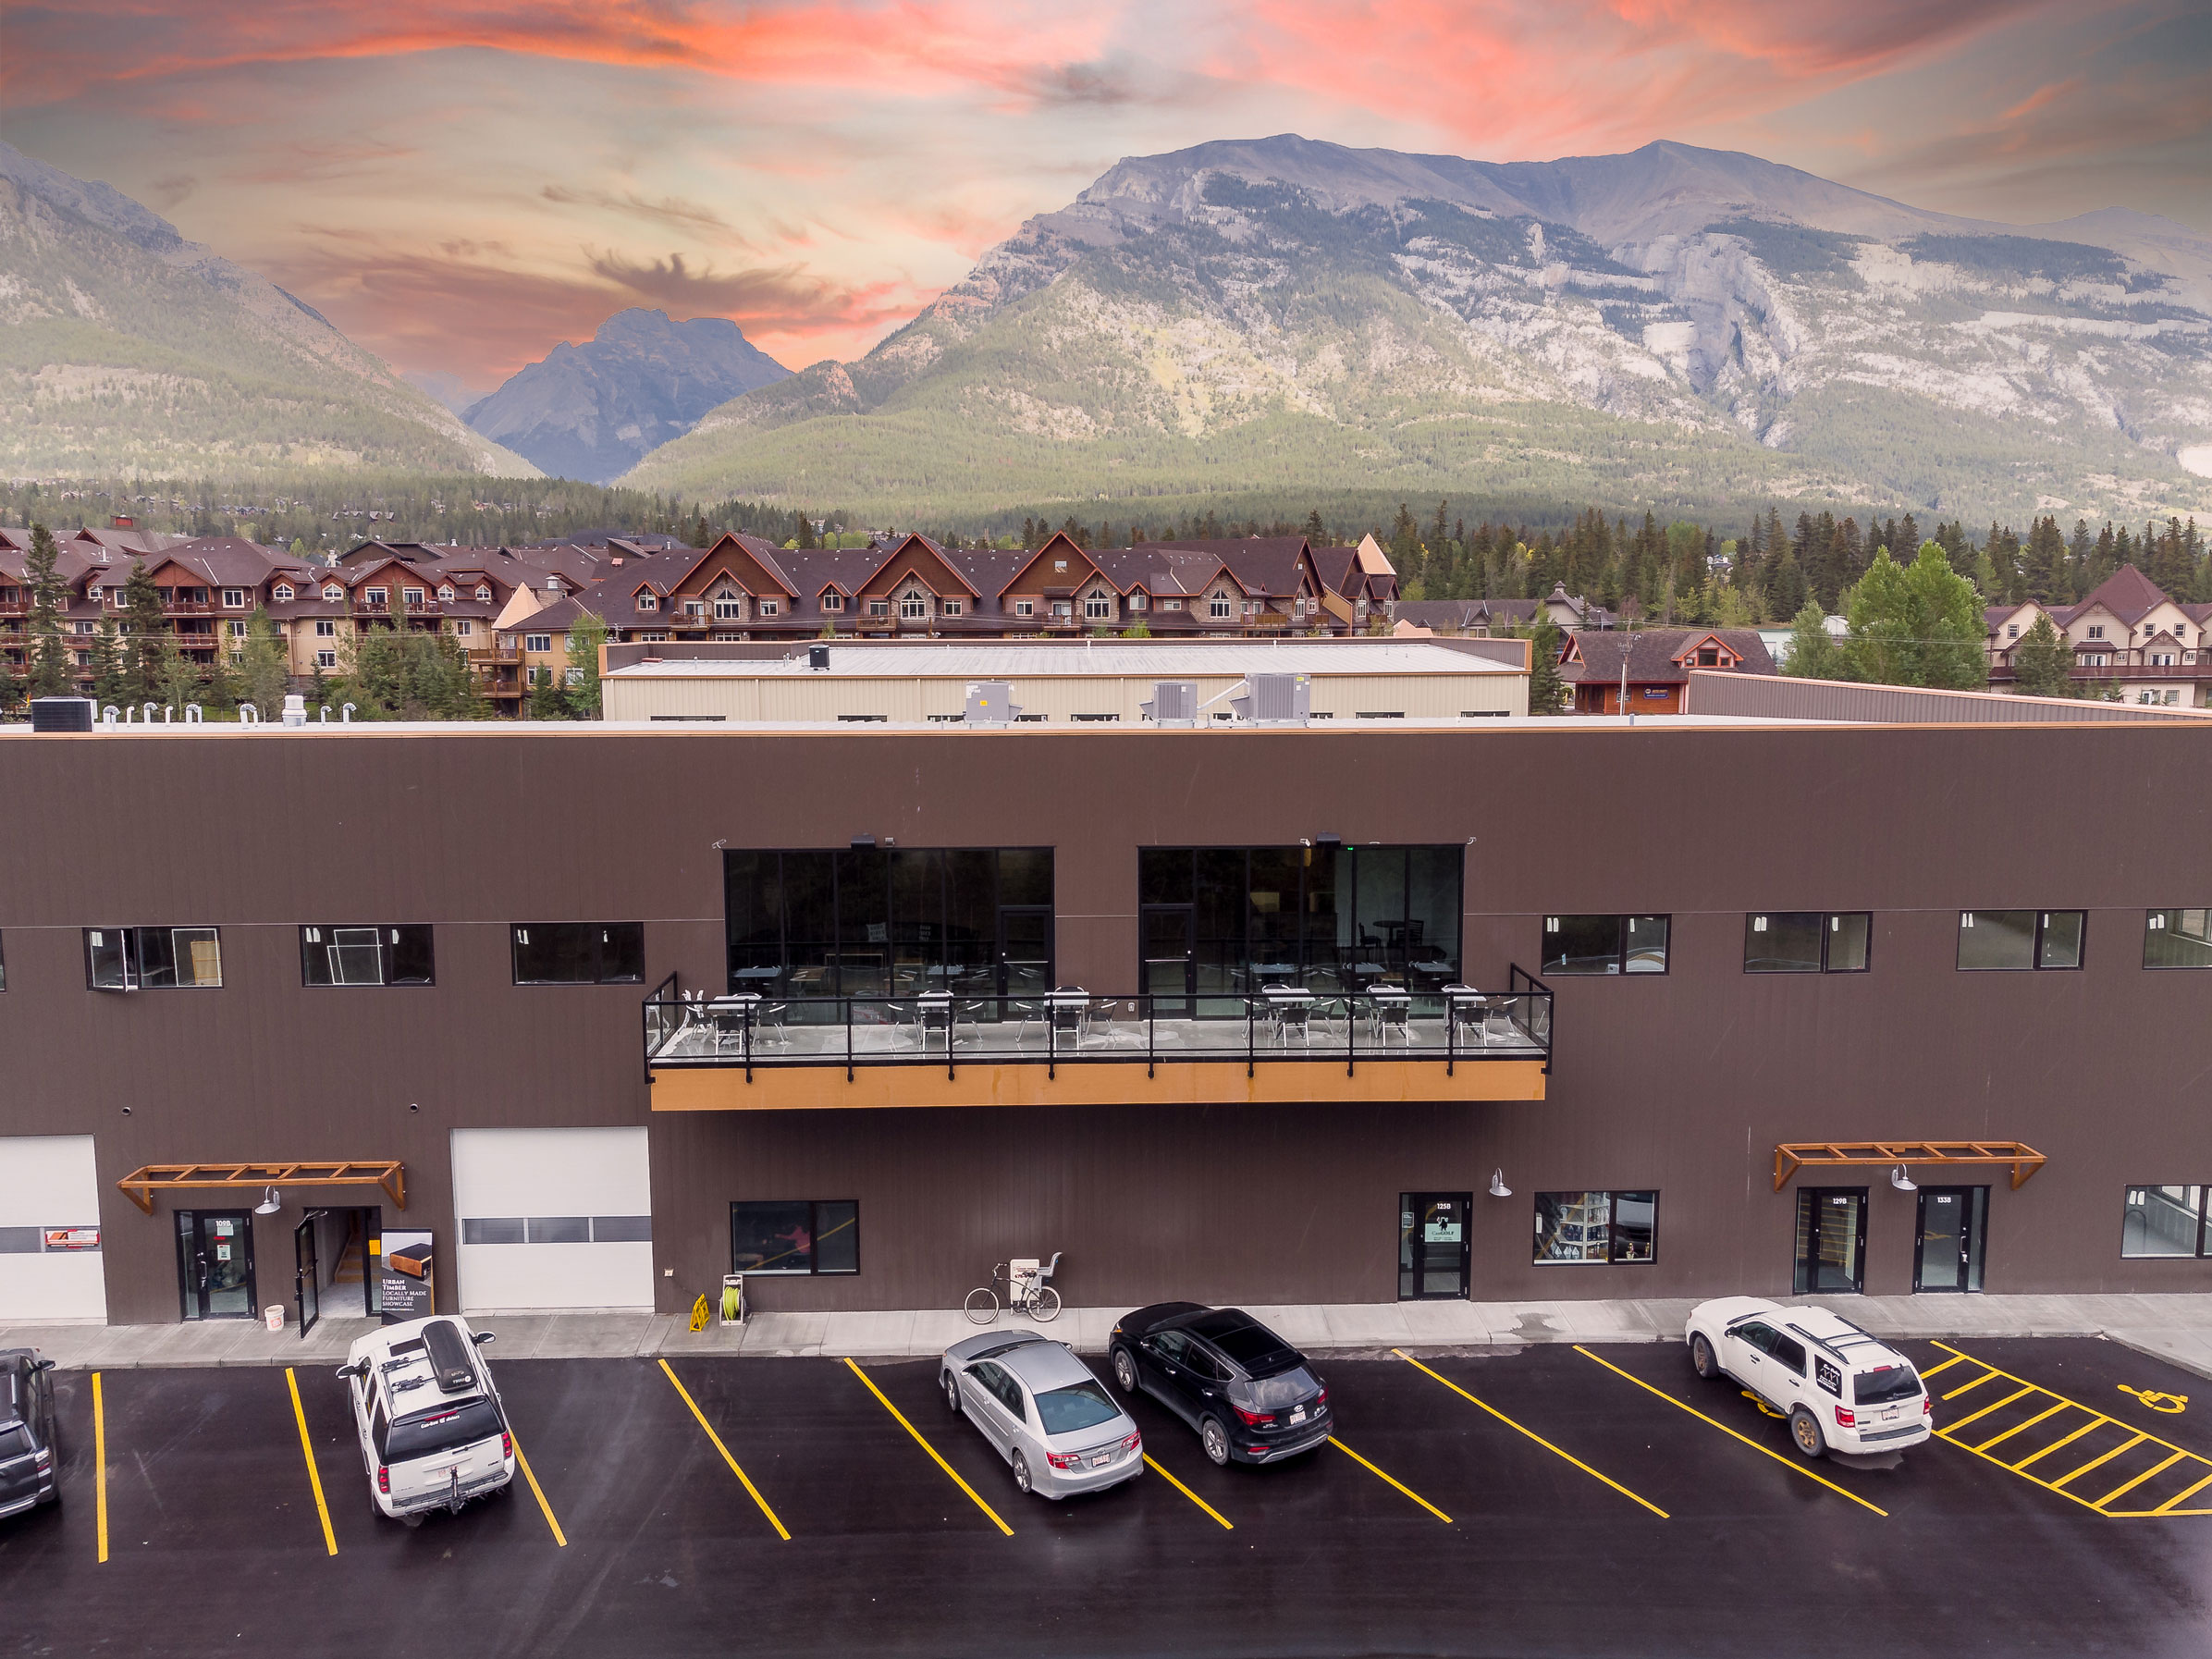 CanGolf is Canmore's newest indoor entertainment venue and restaurant